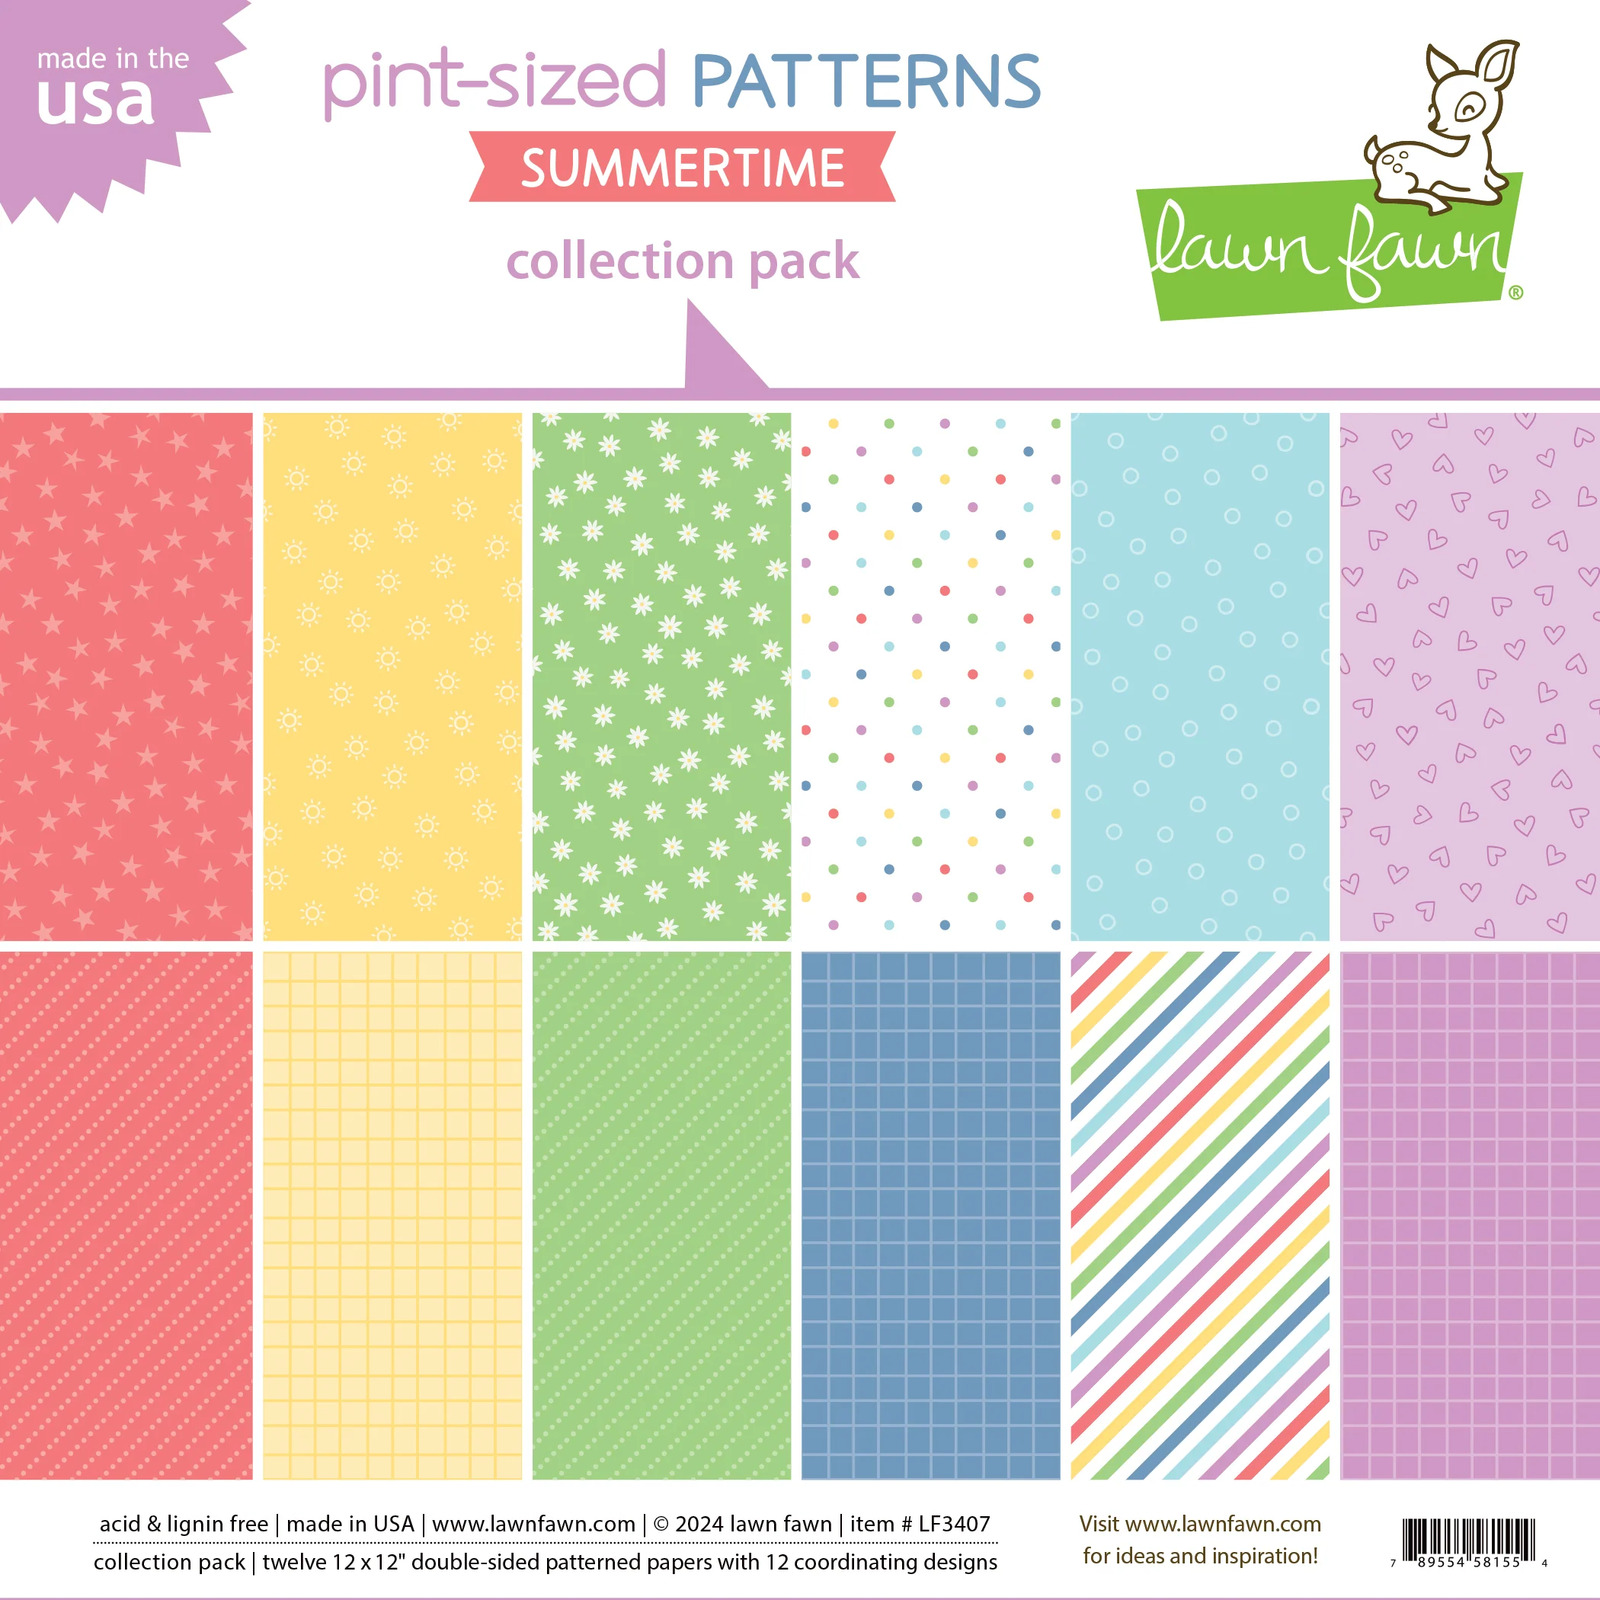 Lawn Fawn - Paper - Pint-sized Patterns Summertime - Collection Pack - LF3407